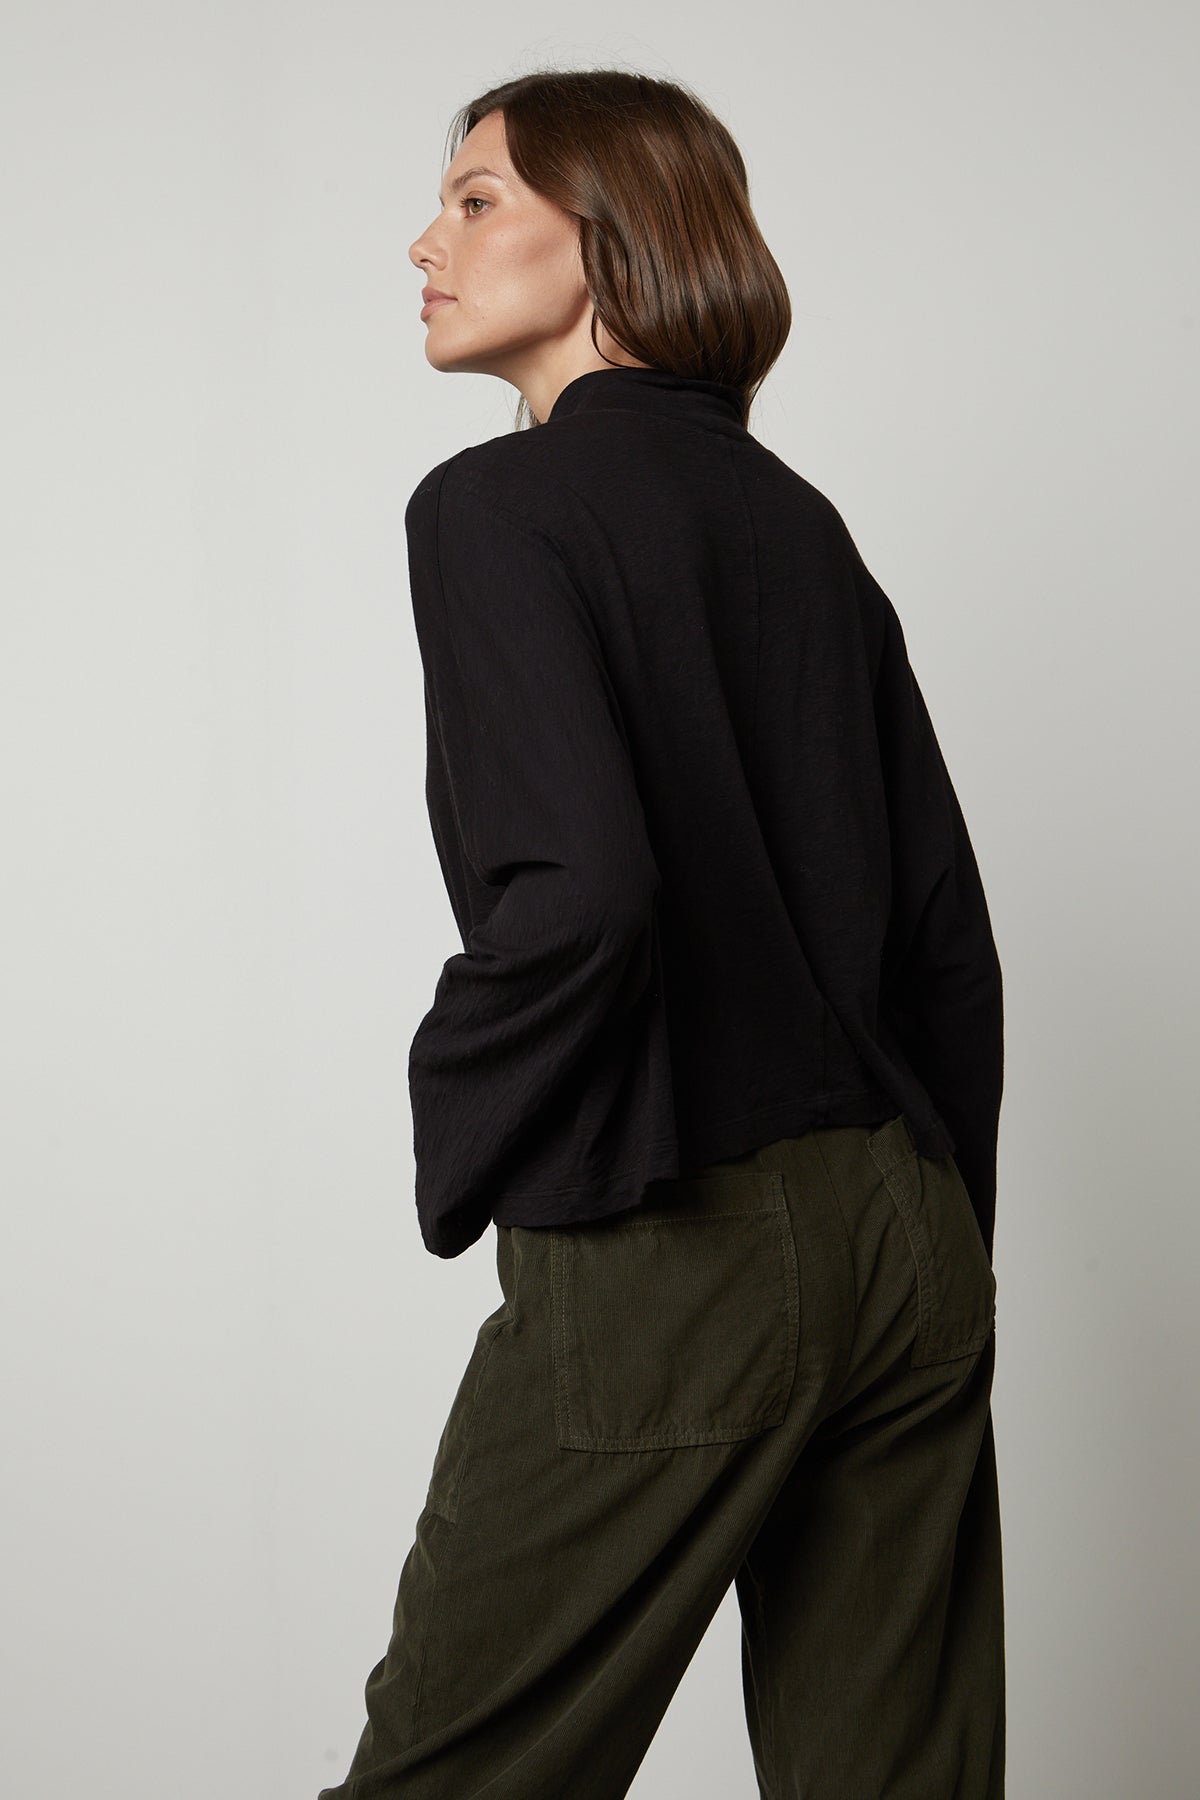 The back view of a person wearing Velvet by Graham & Spencer olive pants and a STACEY MOCK NECK TEE.-26895469379777